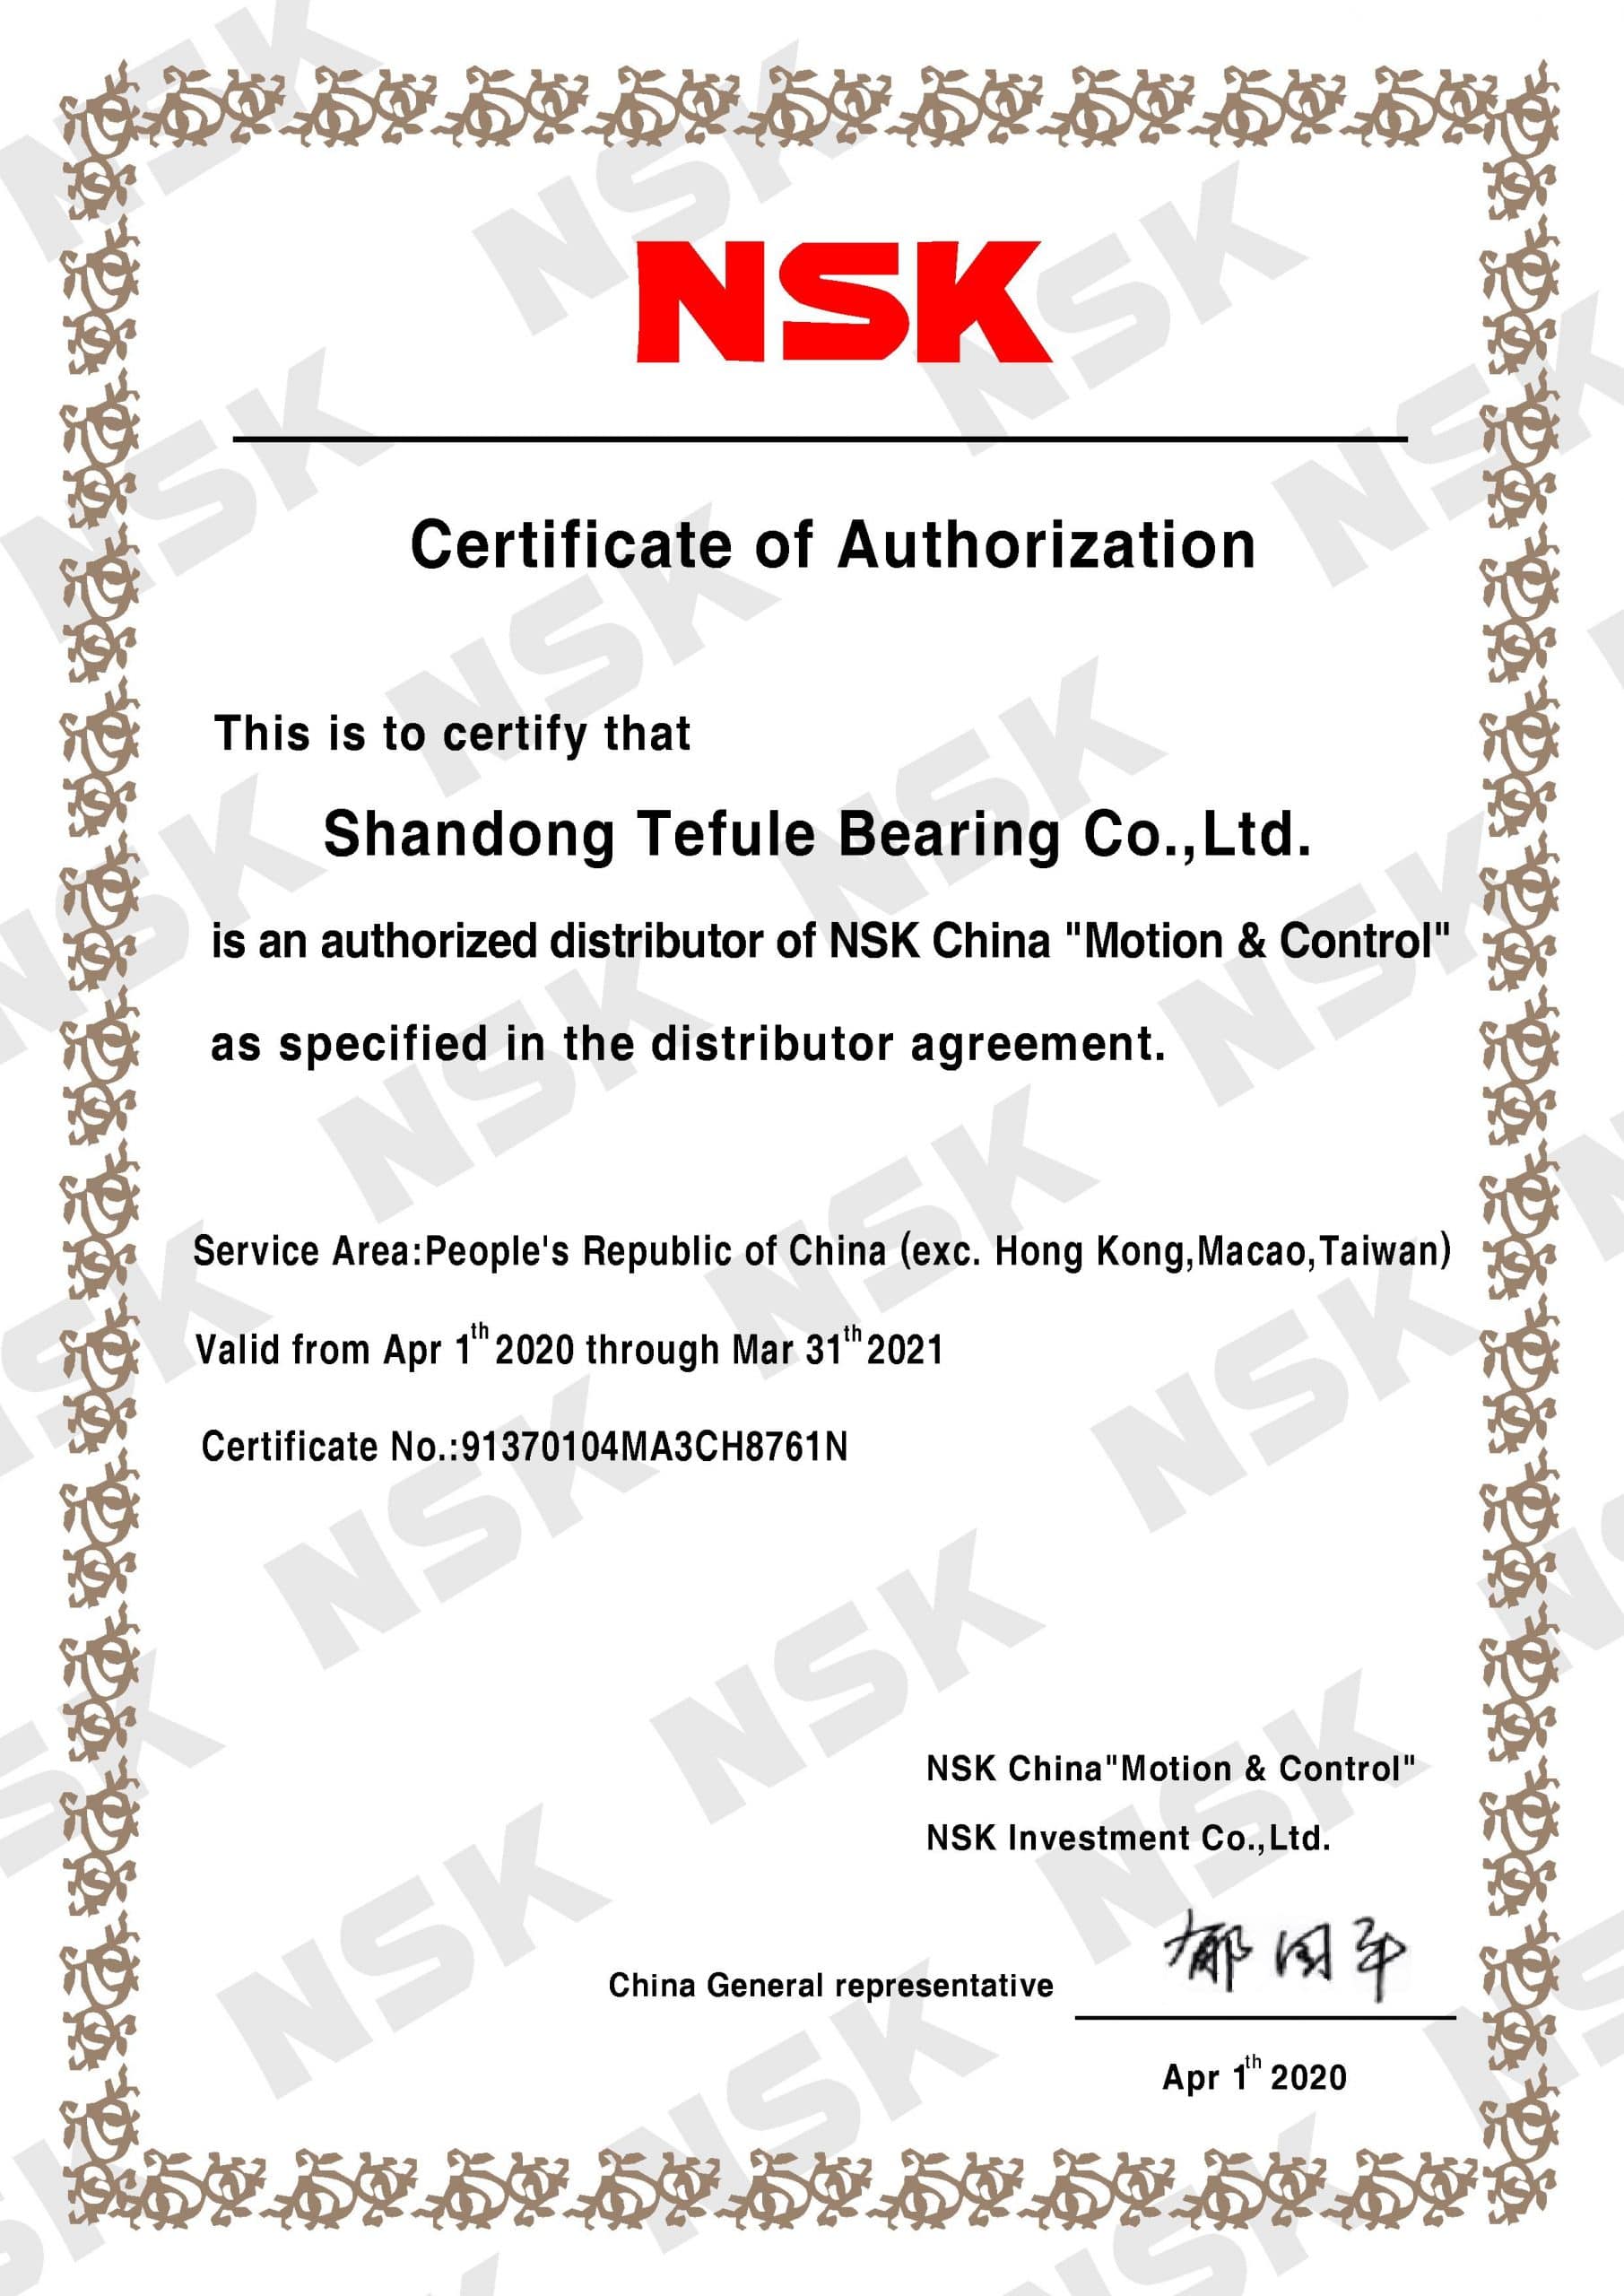 Non-standard stainless steel bearings 3.7*3.5*2.2 Nail special bearing